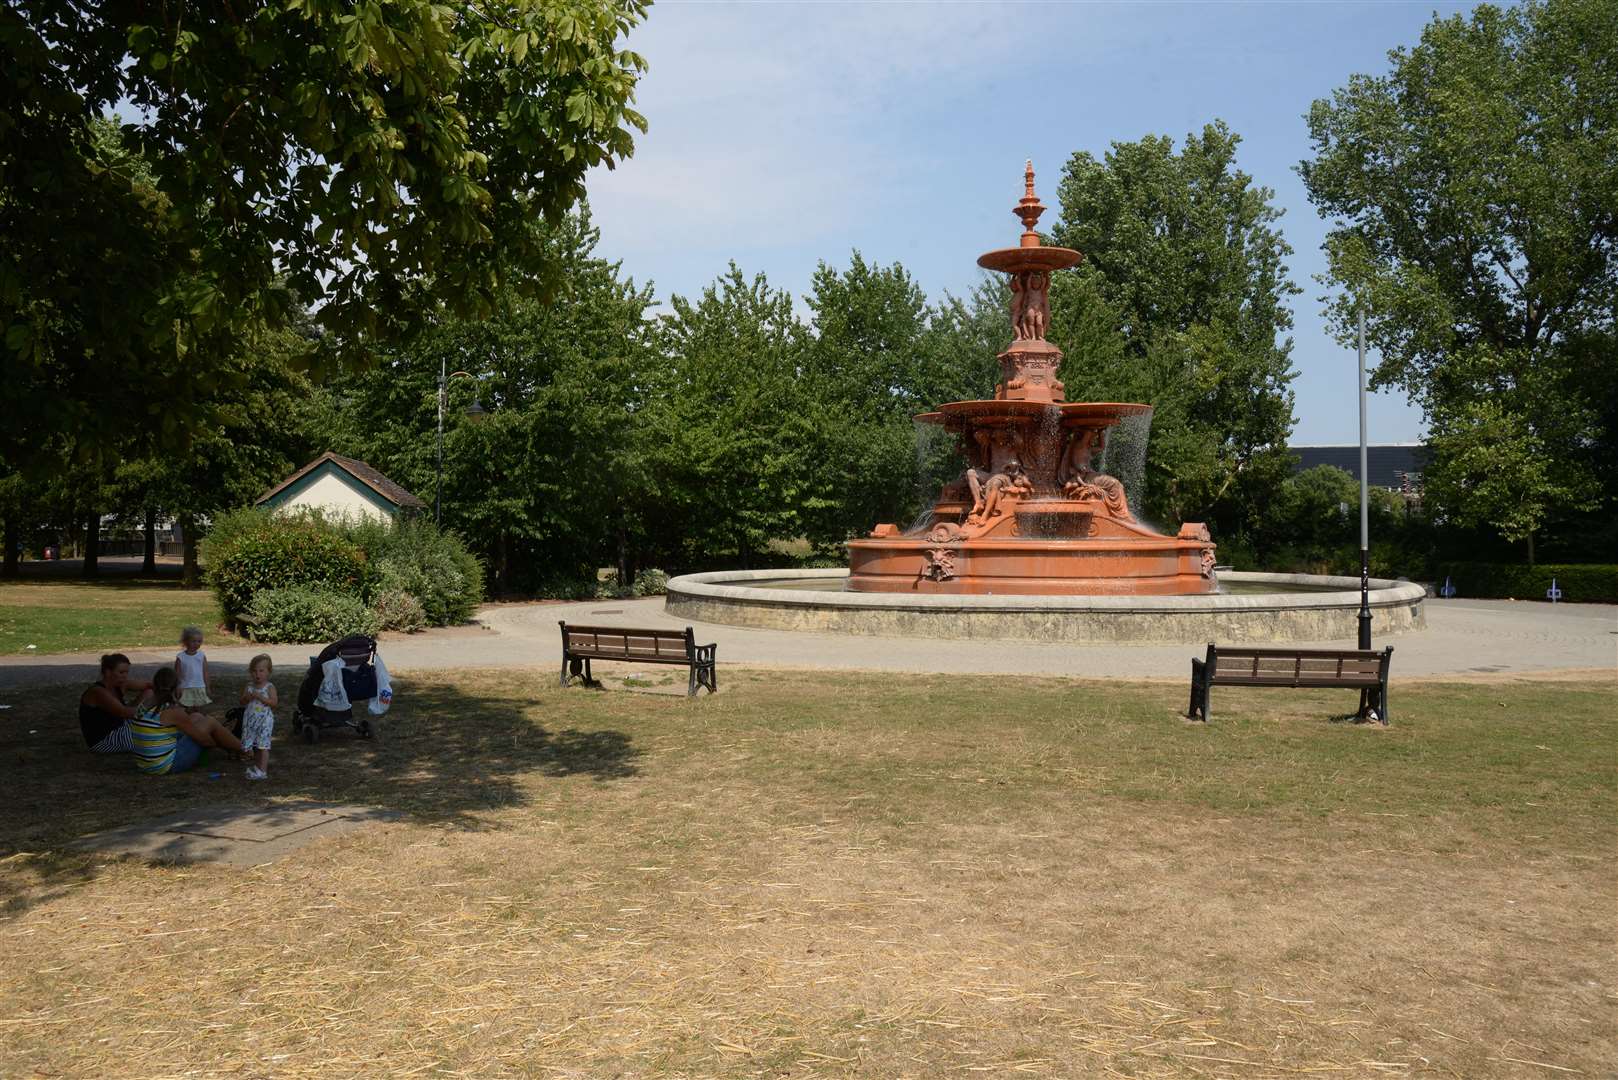 Victoria Park, where the incident took place